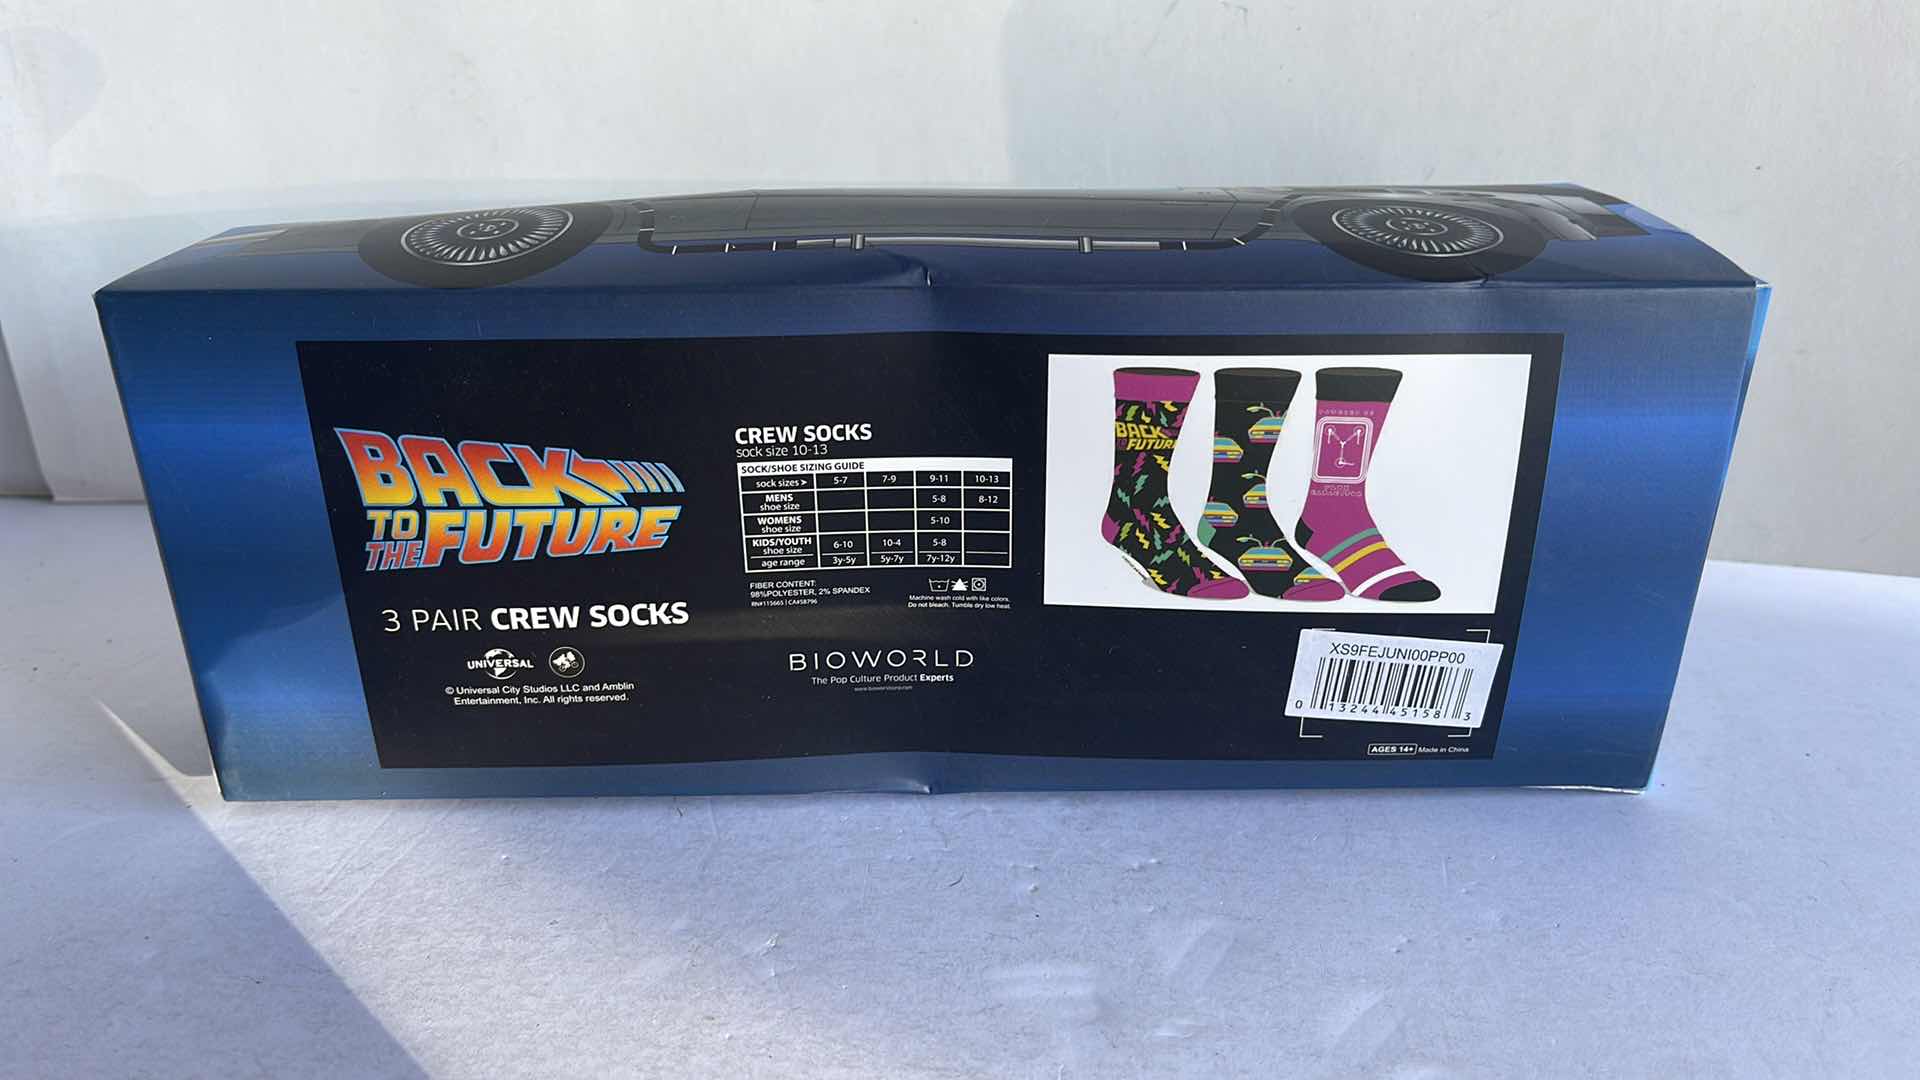 Photo 2 of NIB BACK TO THE FUTURE CREW SICKS (3) SIZE 10-13 MSRP $22.99